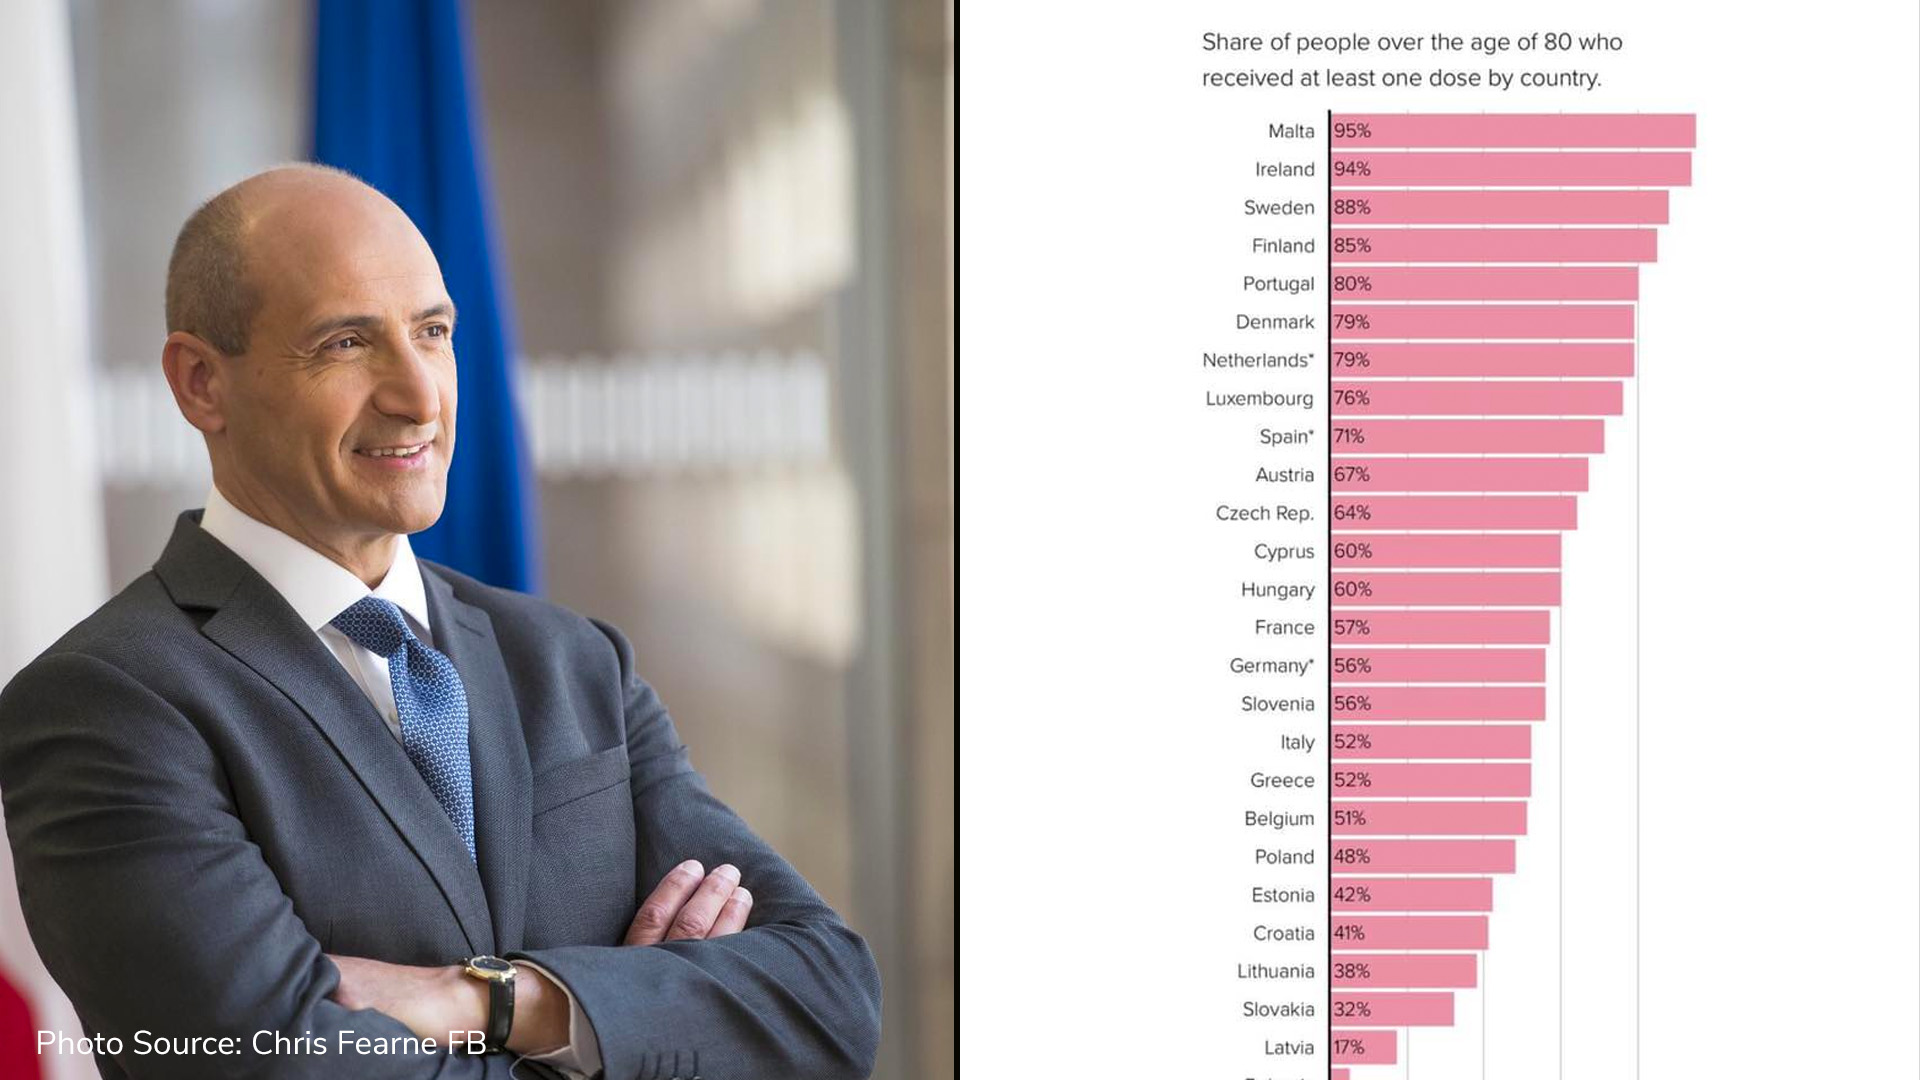 Malta in first place for most vaccinated people over 80